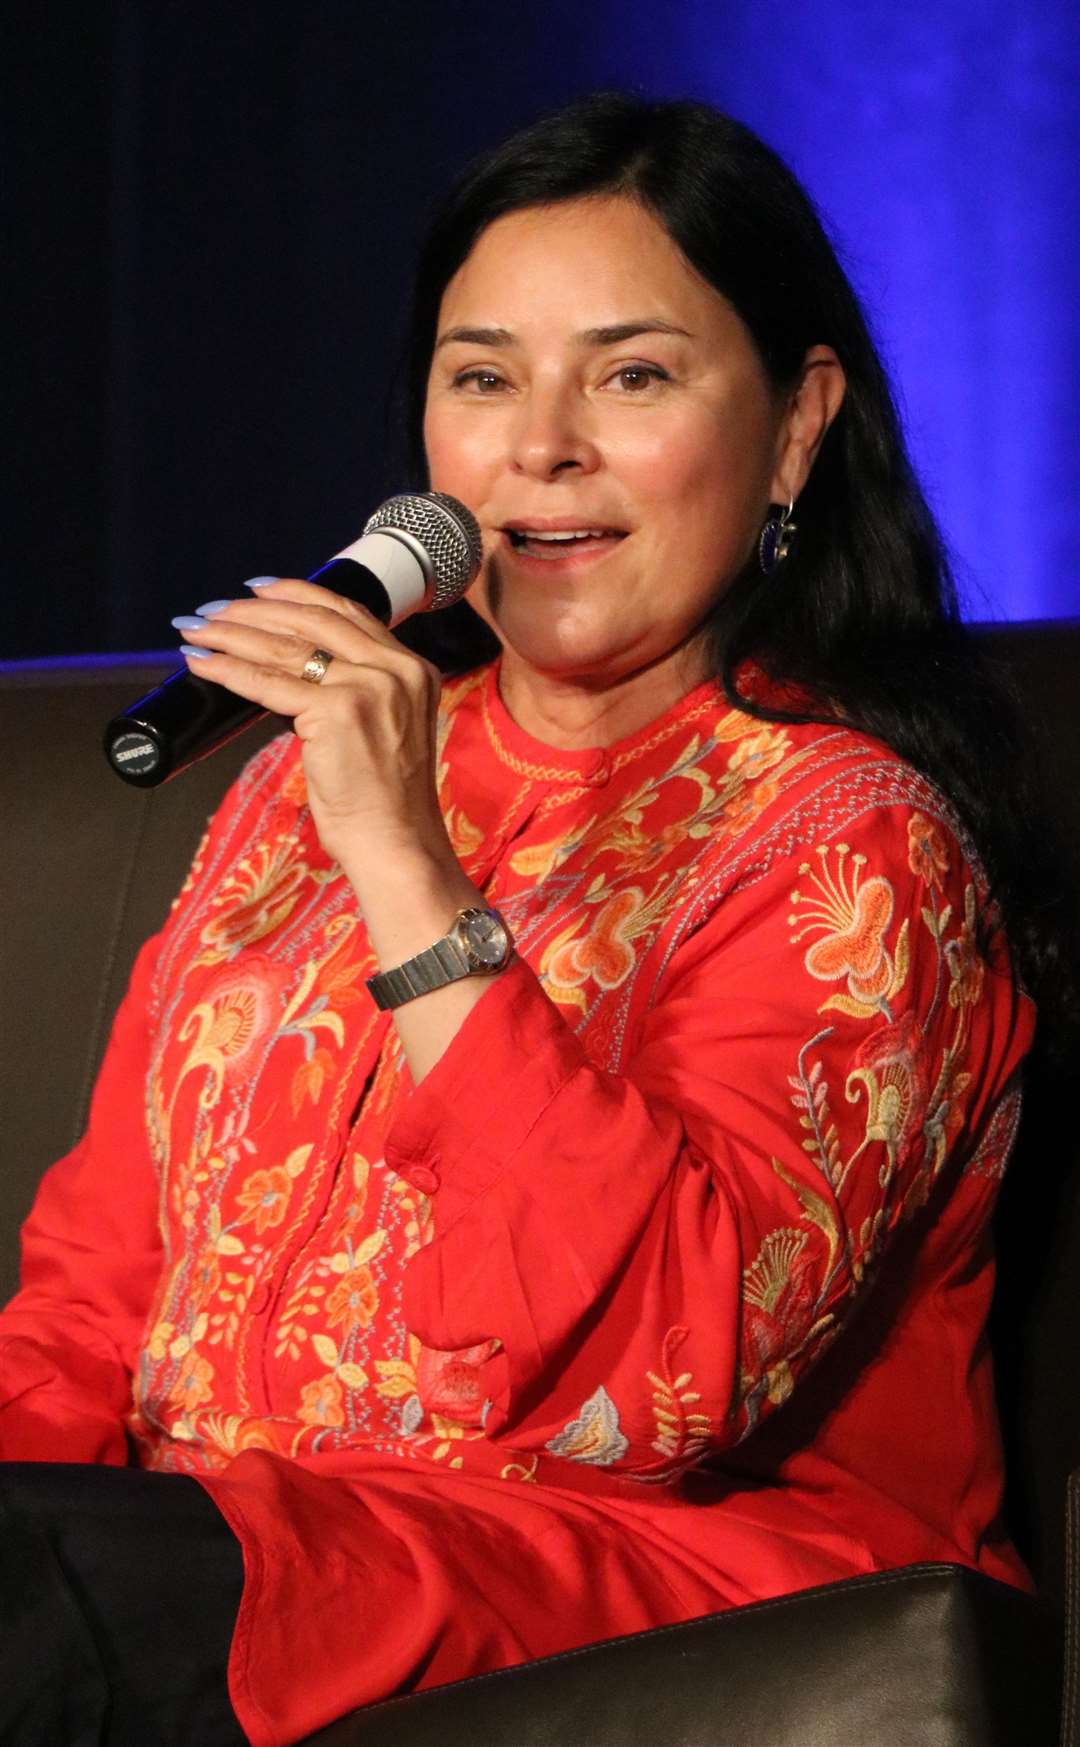 Outlander authur Diana Gabaldon who is heading for Inverness.